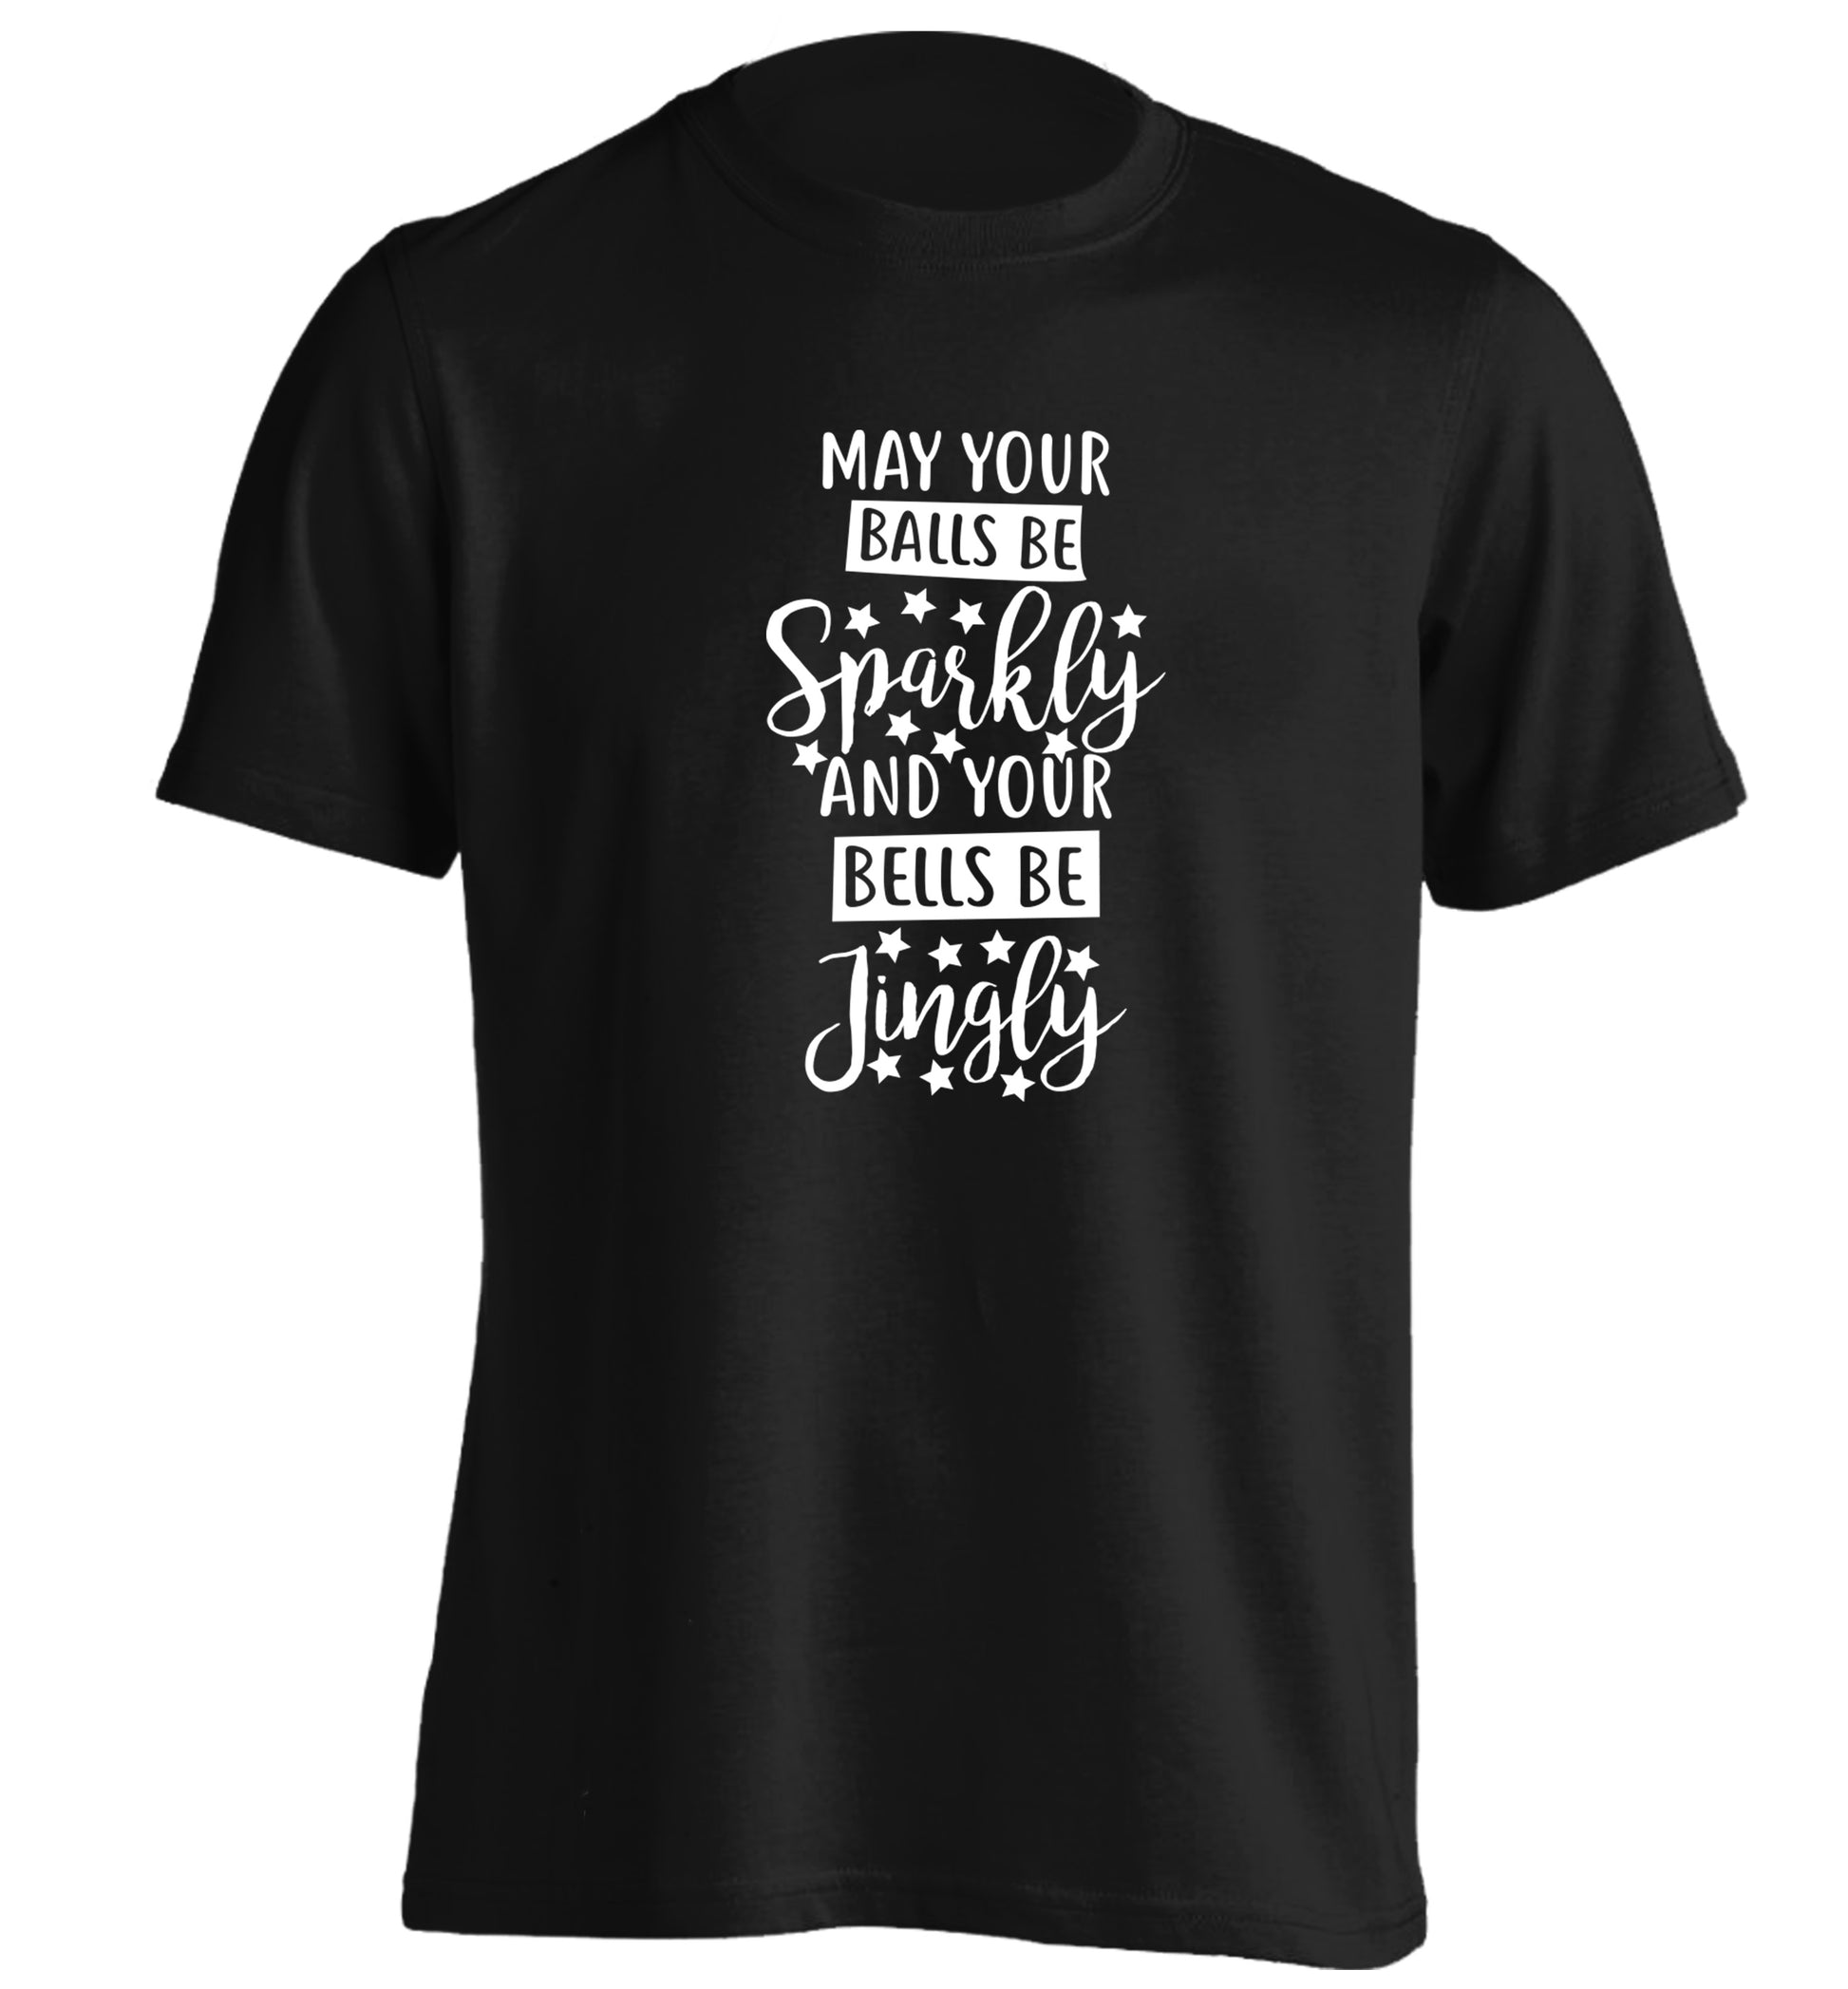 May your balls be sparkly and your bells be jingly adults unisex black Tshirt 2XL